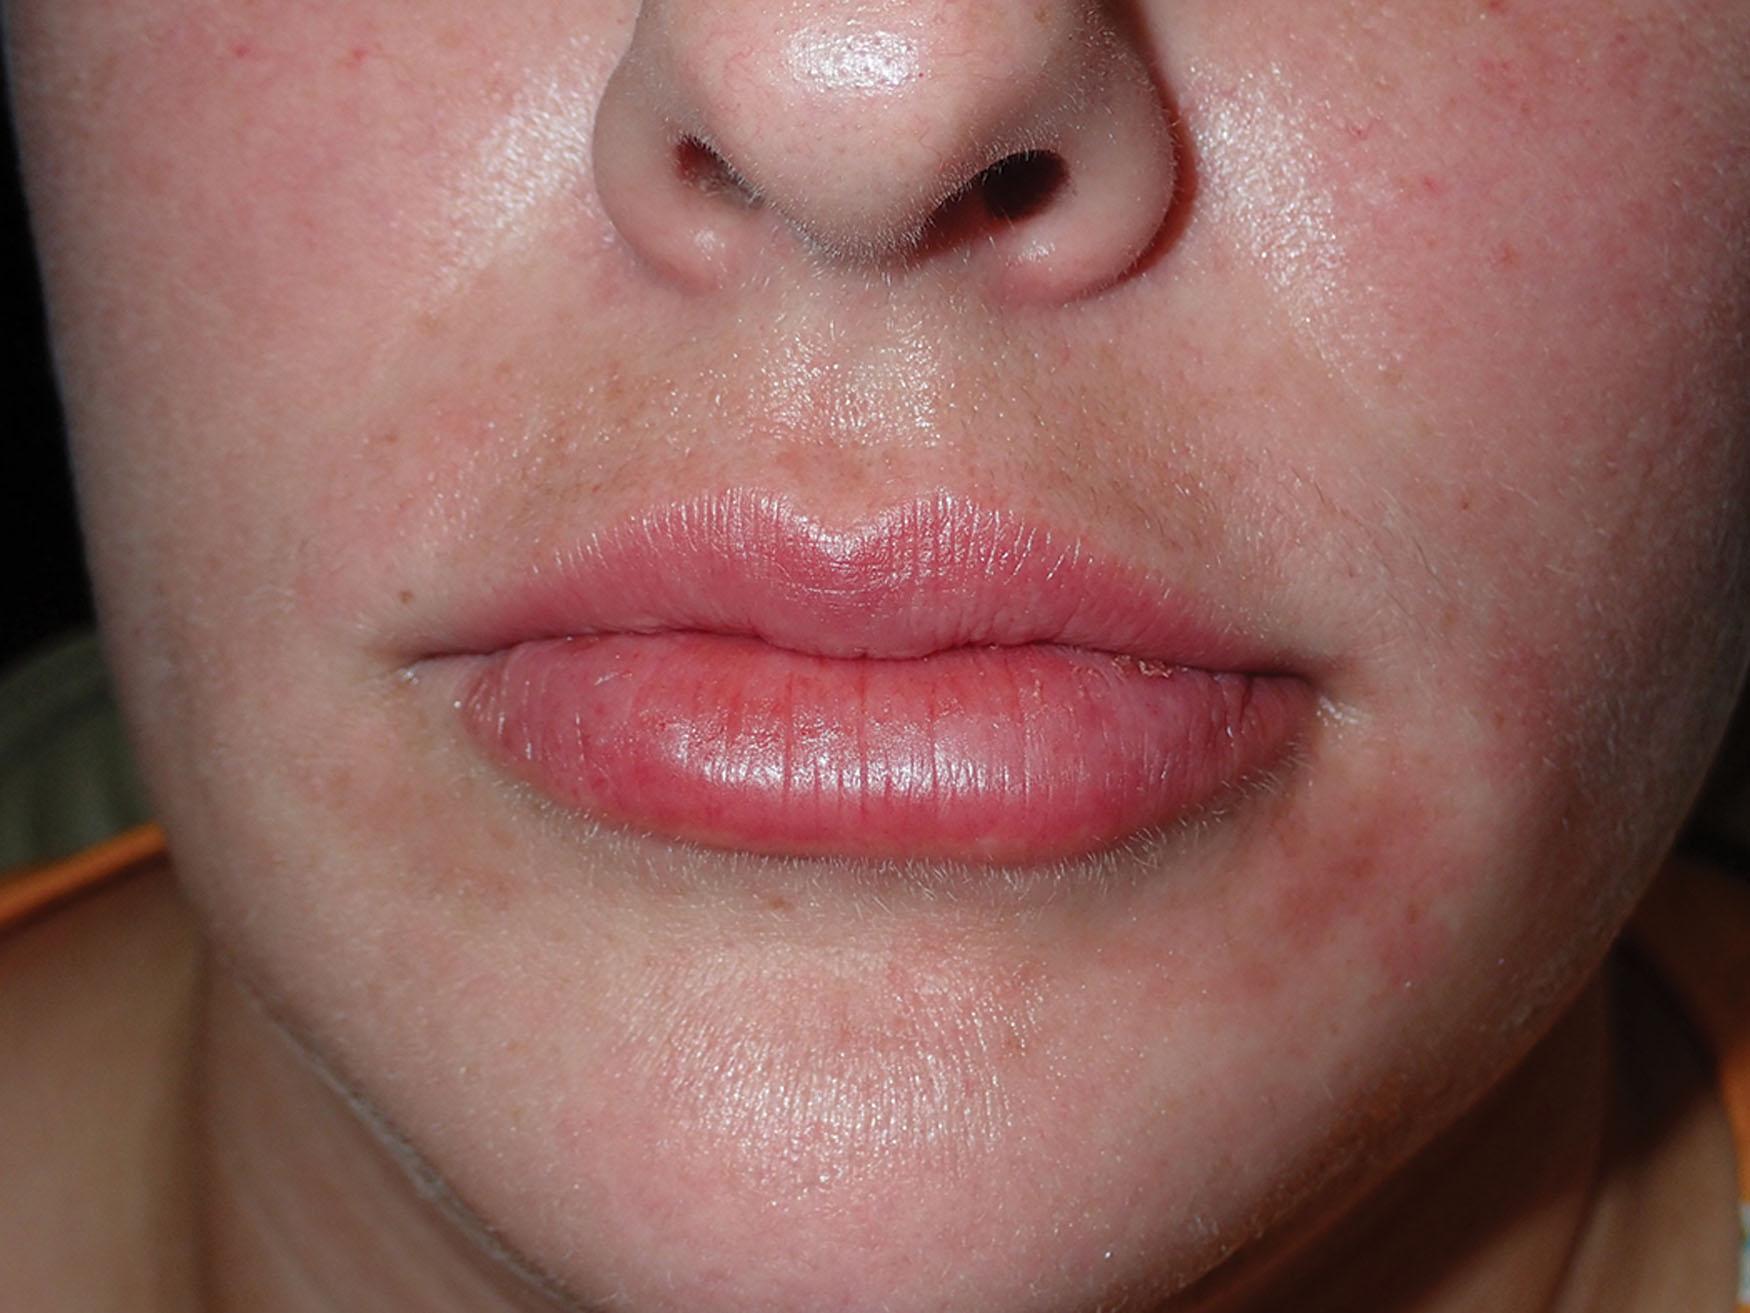 Fig. 10.29, This patient is shown immediately after 0.5 mL of hyaluronic acid filler was injected in each lip using the cannula method. Note the lack of swelling and bruising.